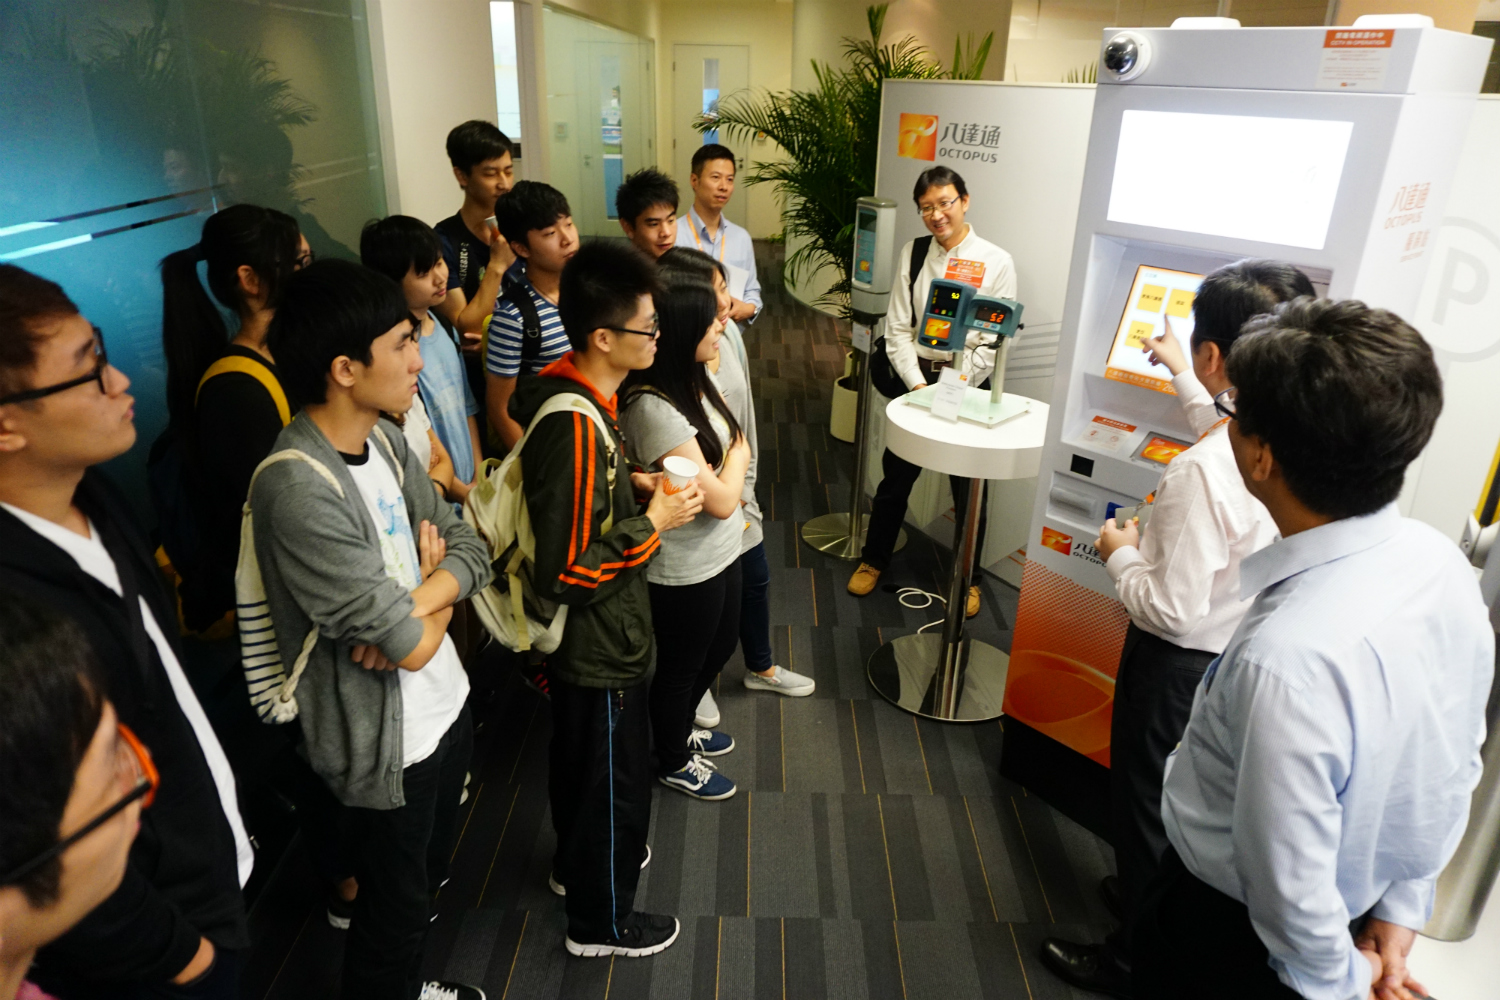 Students and teaching staff had a wonderful learning experience by visiting the Kowloon Bay Office of Octopus Cards Limited.